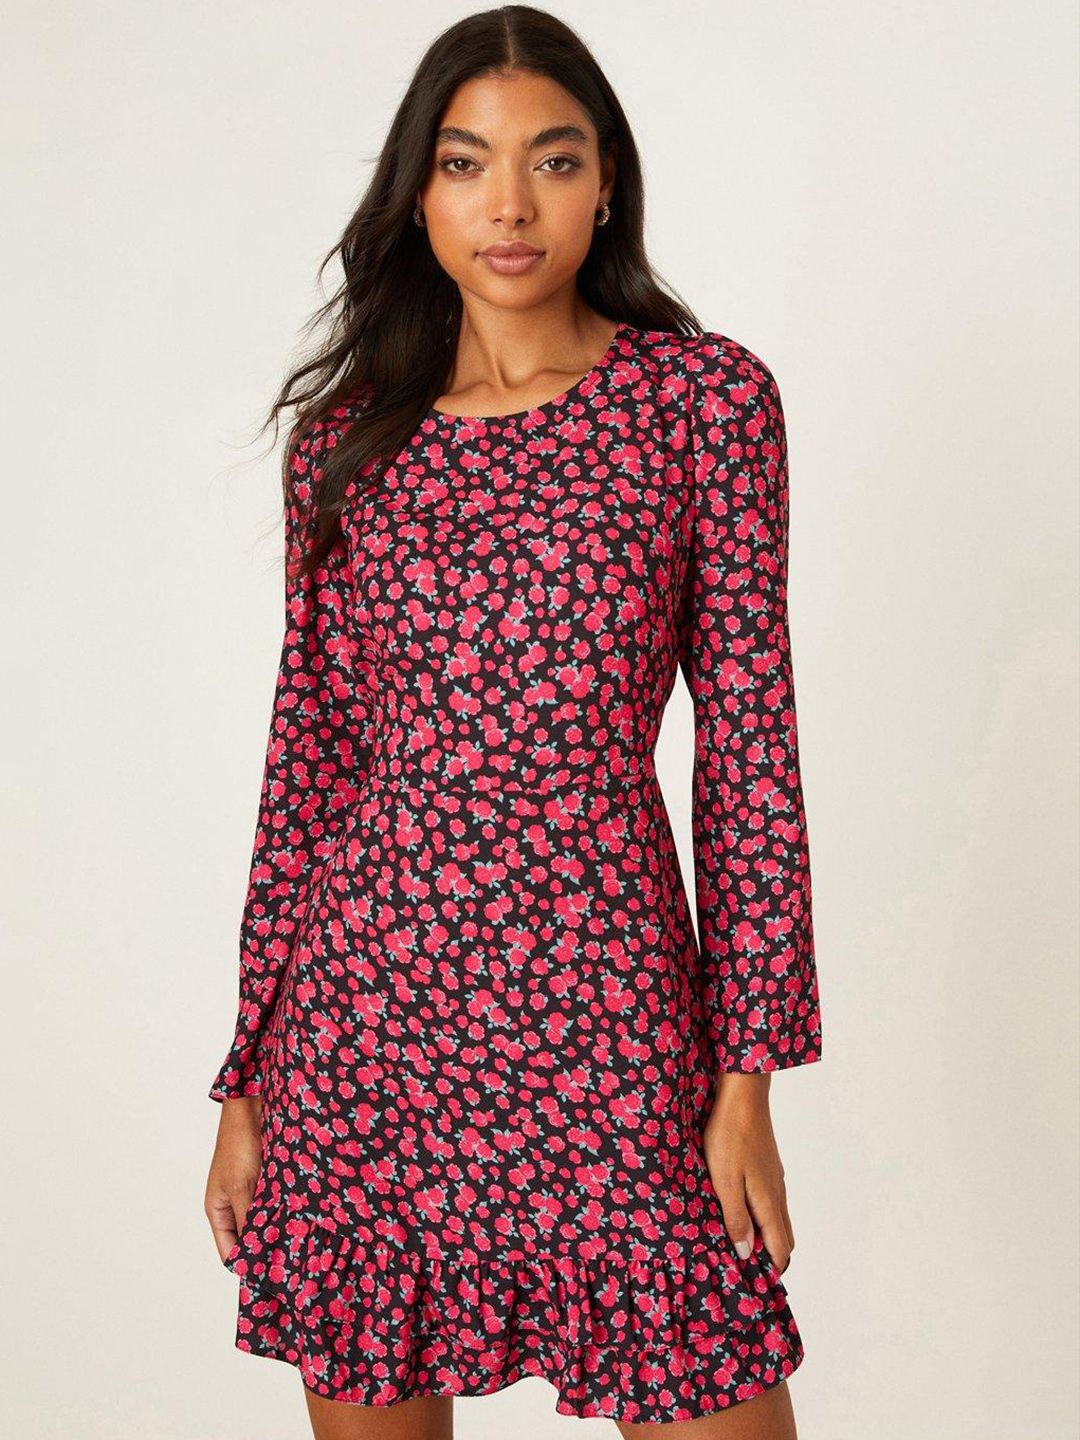 DOROTHY PERKINS Floral Print A-Line Dress Price in India